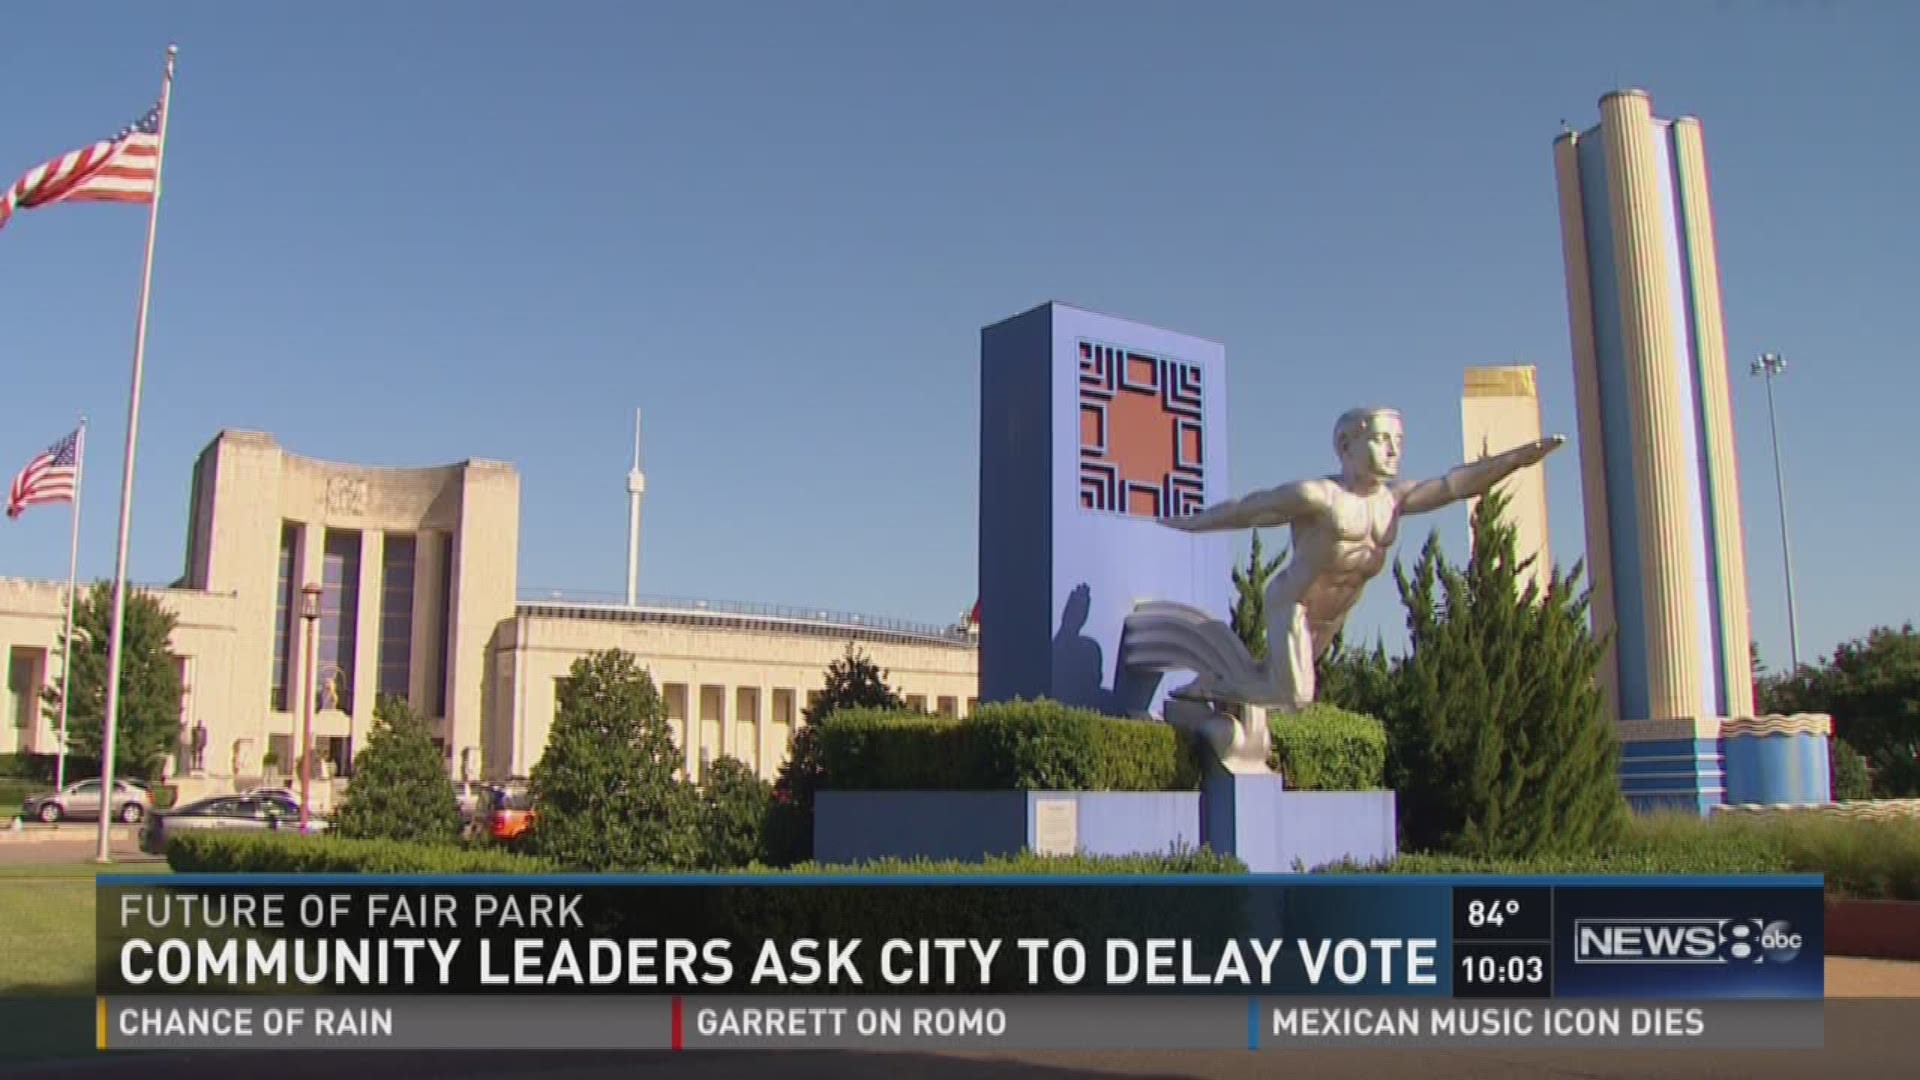 Community leaders ask city to delay vote